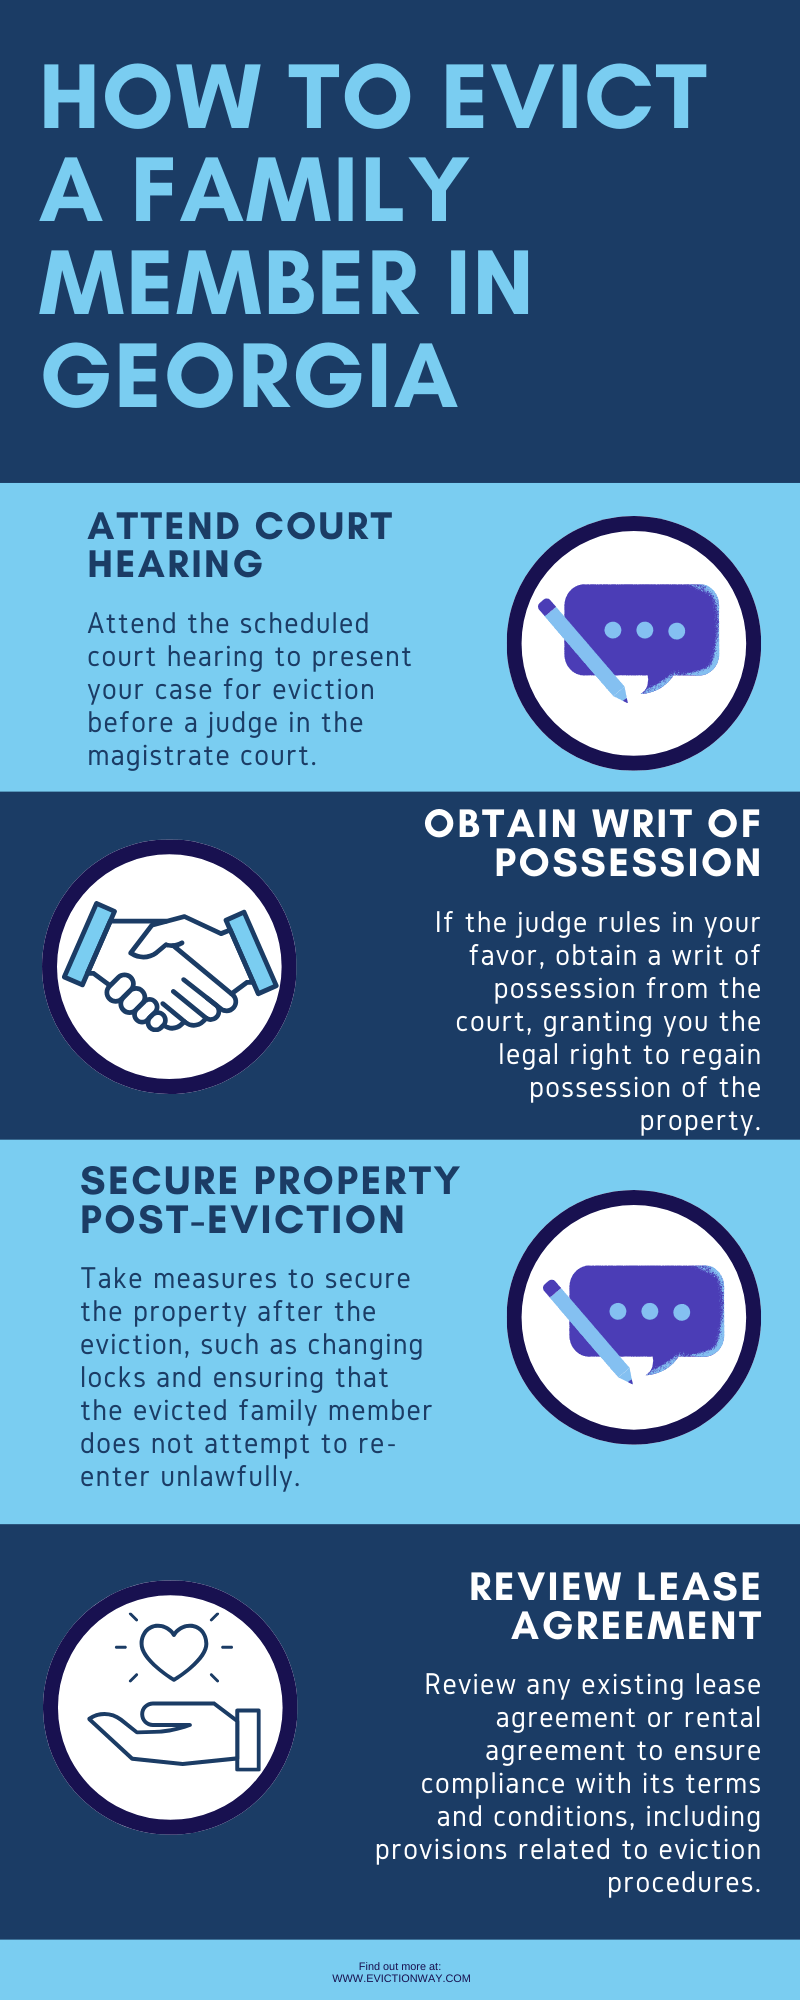 How to Evict a Family Member in Georgia